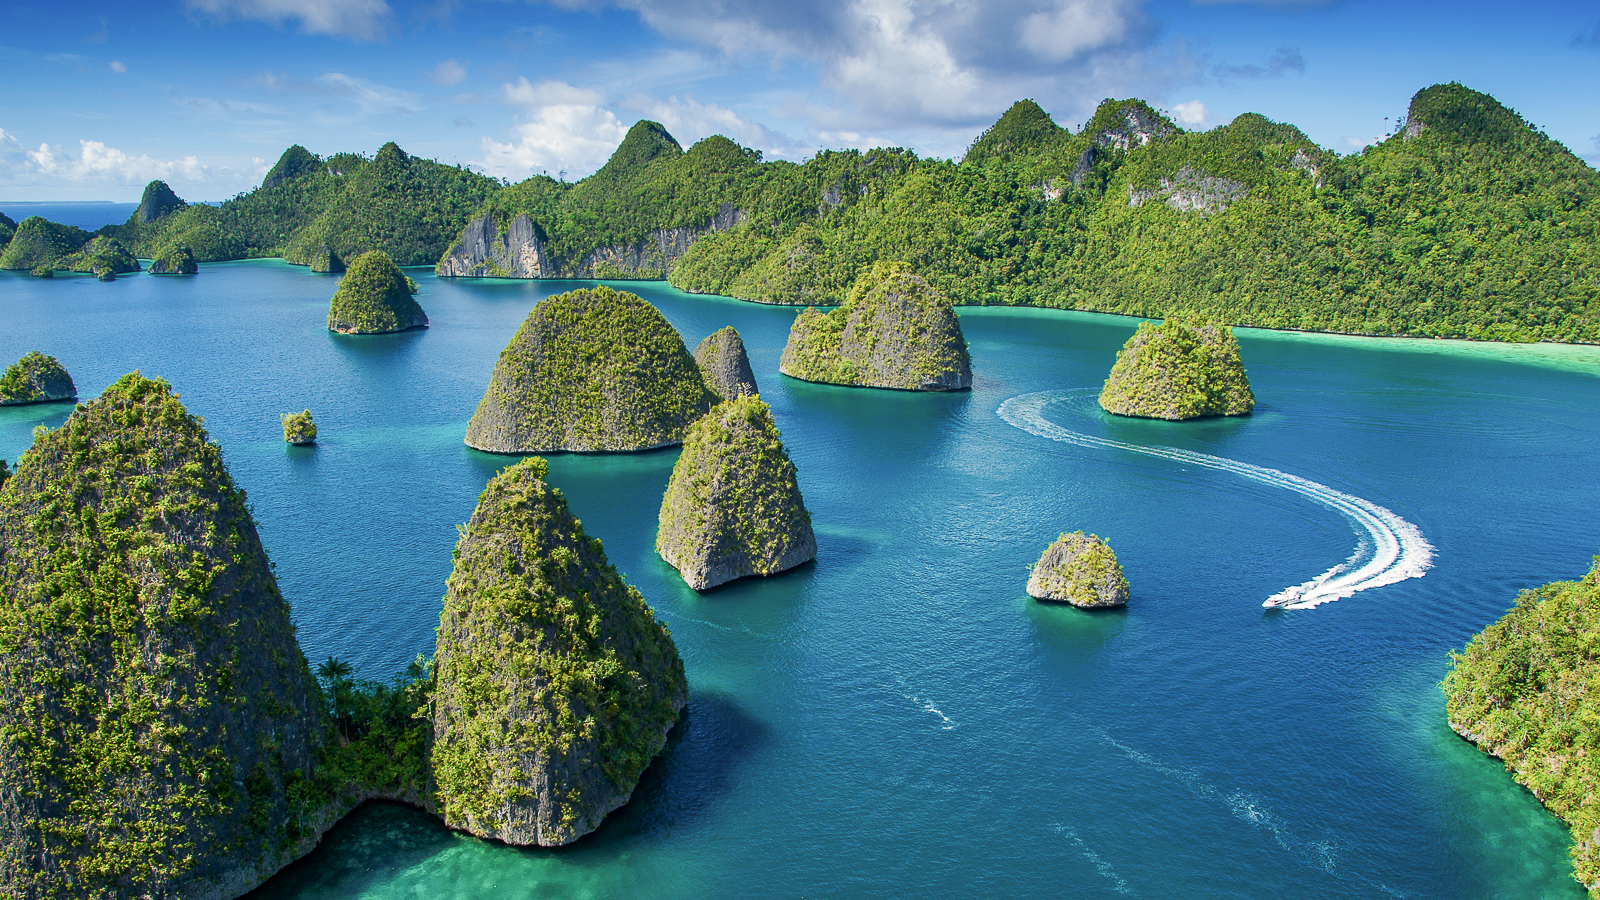 Scuba diving in Raja Ampat - from a dive resort and liveaboard?